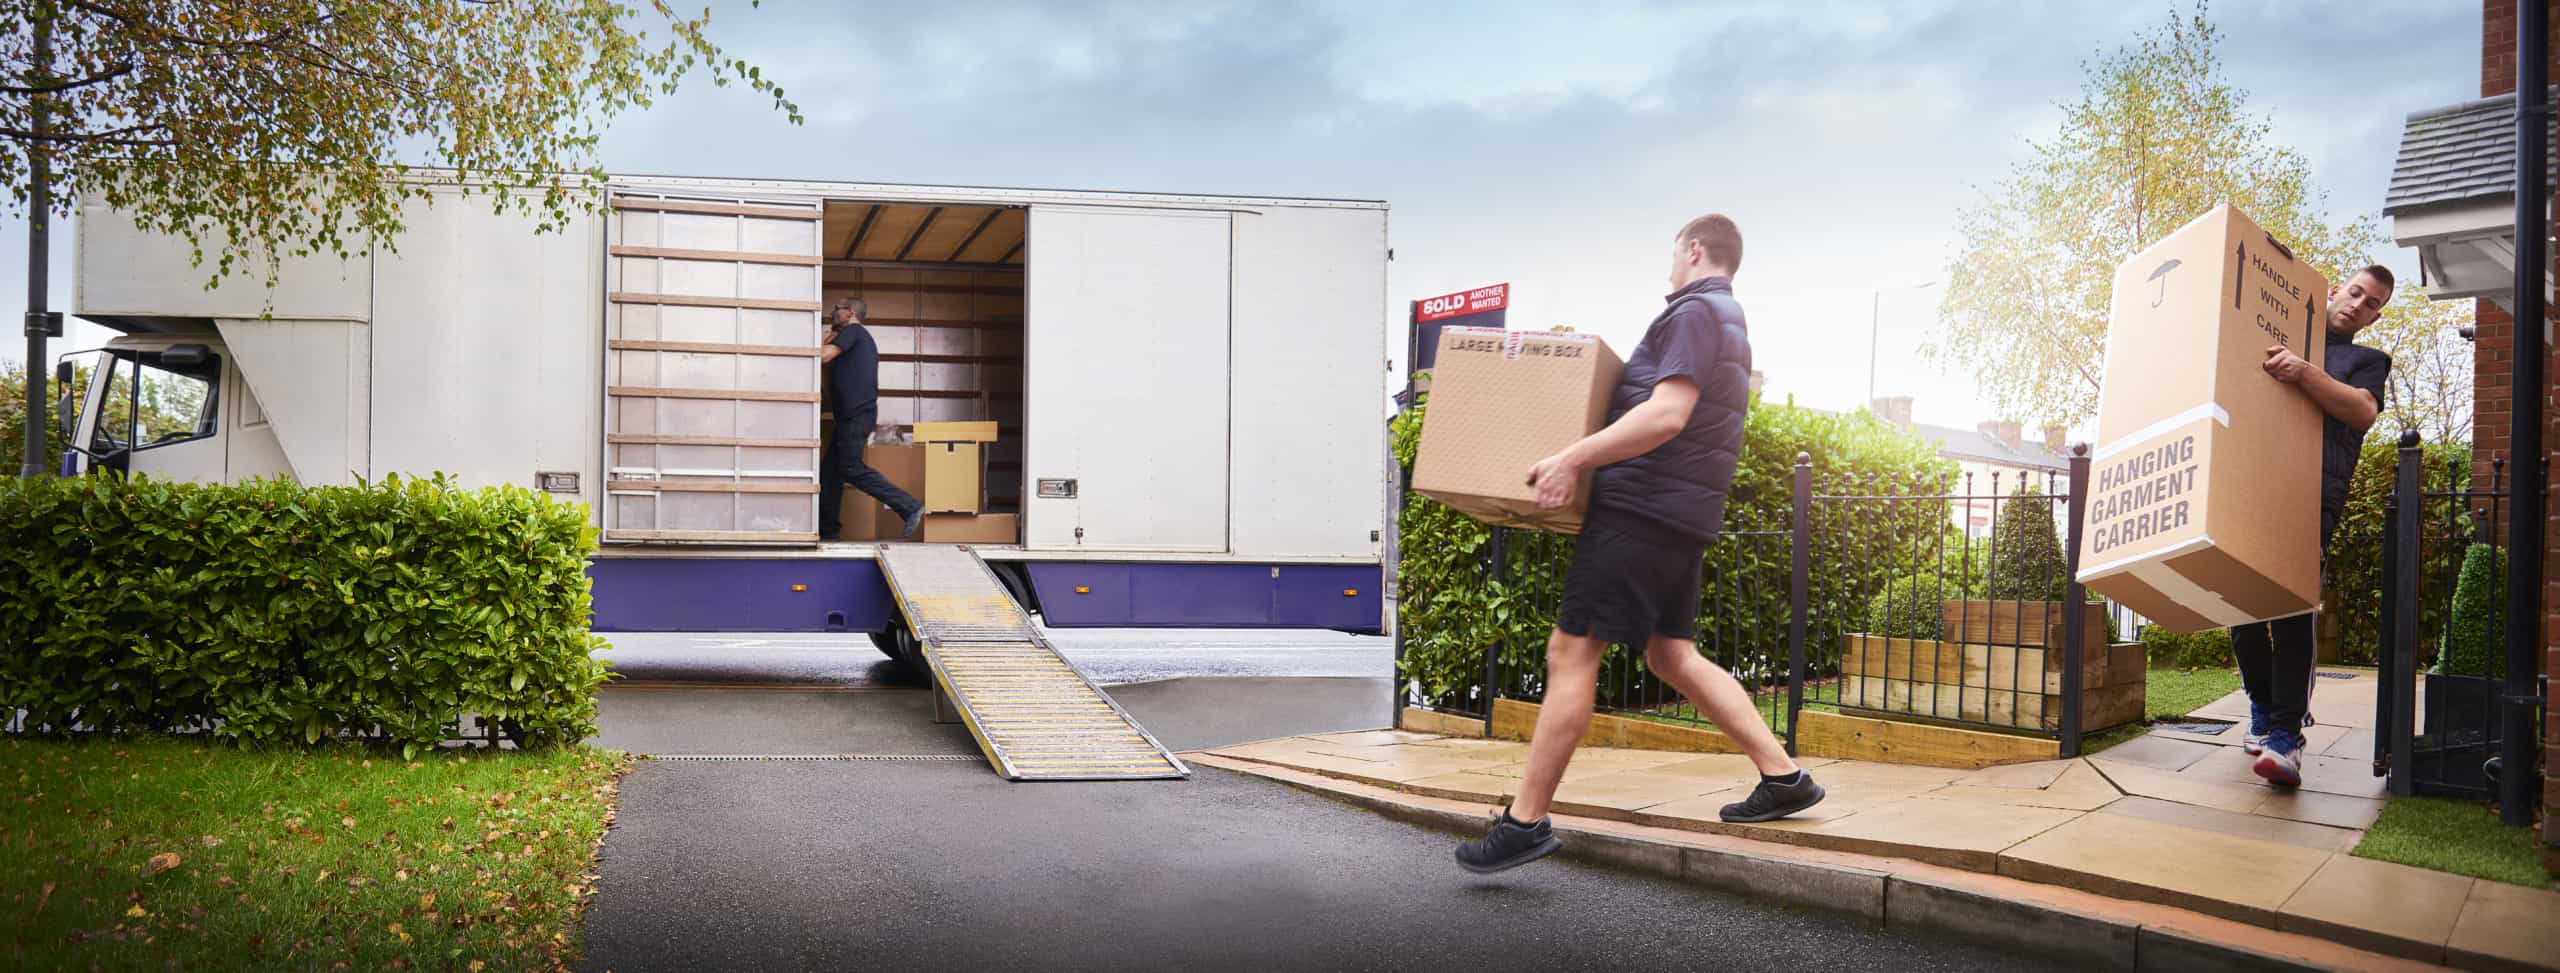 Removals and Storage London